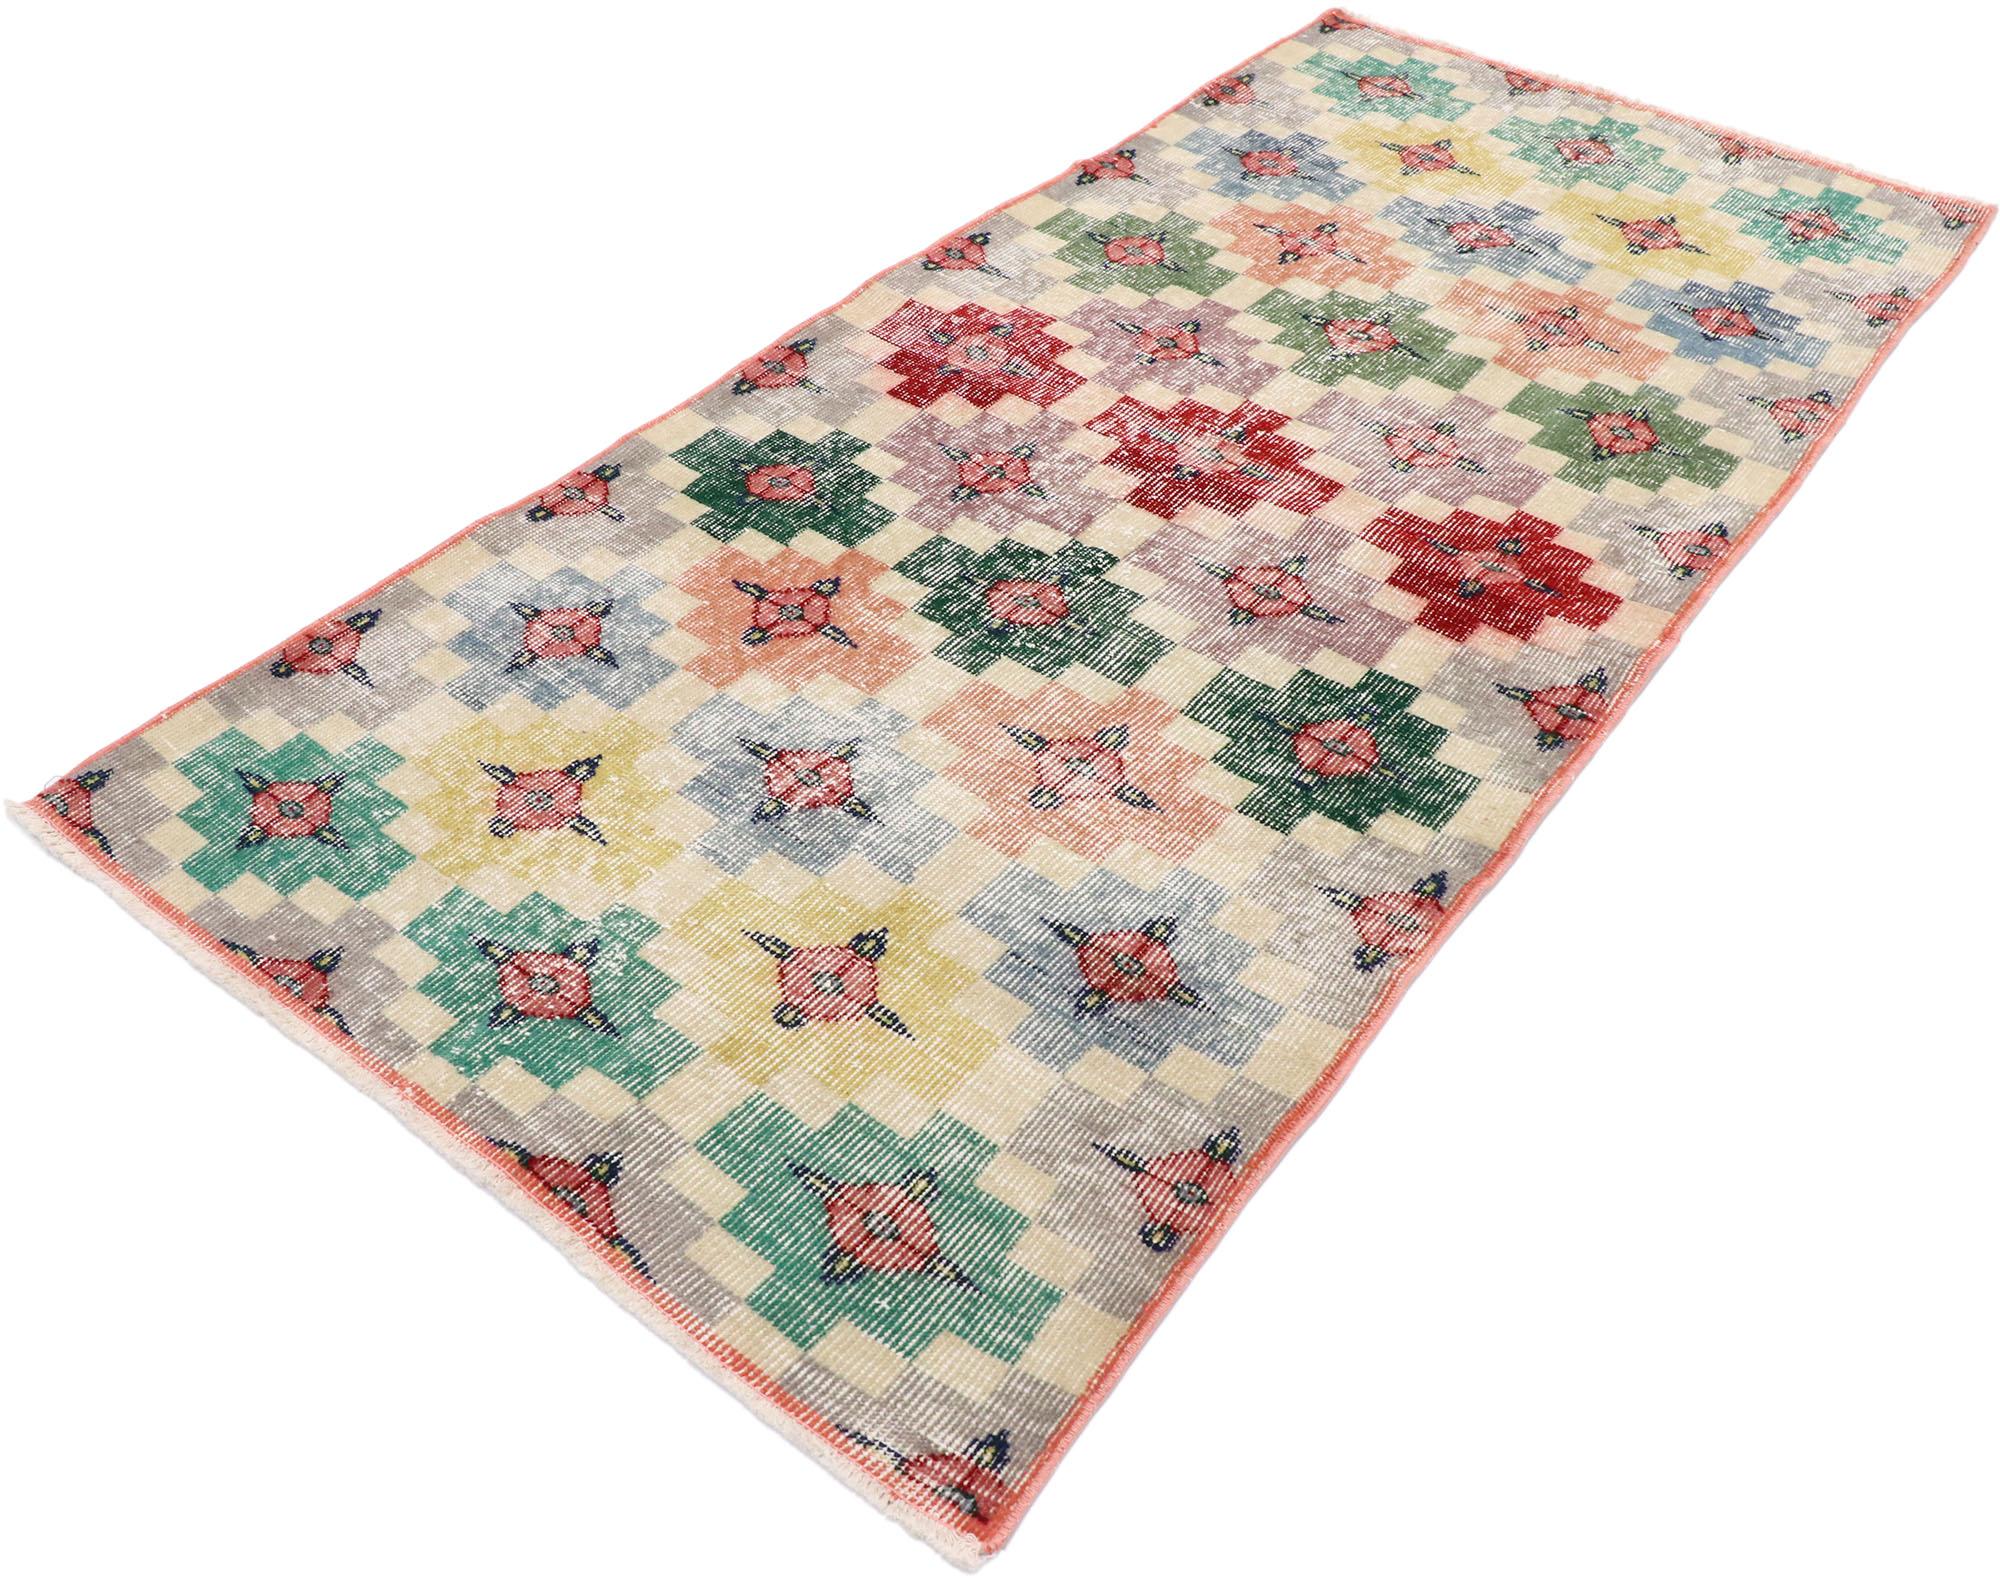 53348, Zeki Muren distressed vintage Turkish Sivas rug with Postmodern Cubism style. Displaying a bold form in vibrant colors, this hand knotted wool distressed vintage Turkish Sivas rug features an all-over adventurous geometric pattern. The